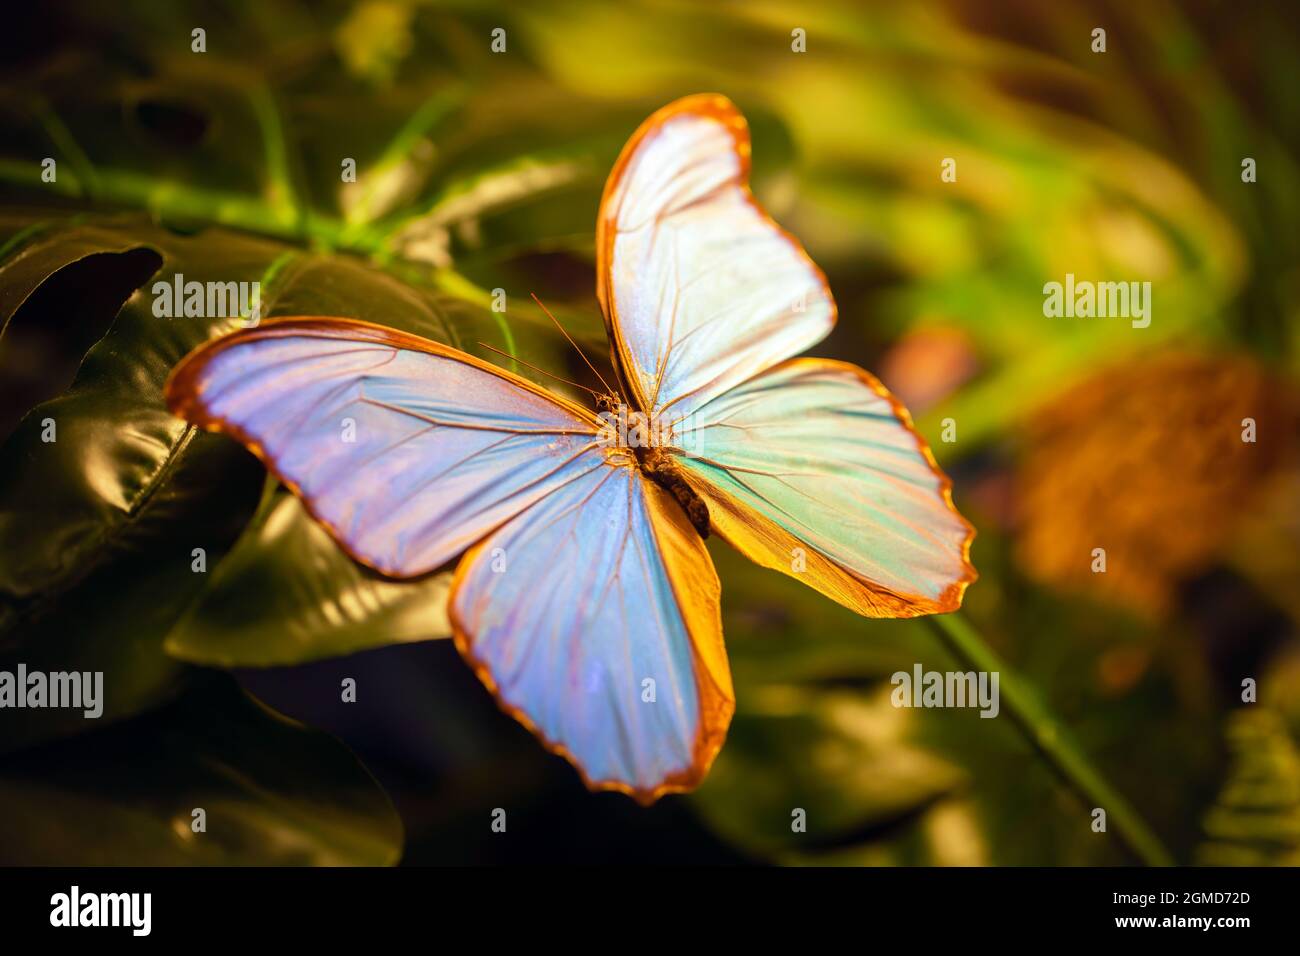 Beautiful butterfly called Morpho menelaus  |  Menelaus blue morpho from Nymphalidae family standing on green leaves in showcase. Stock Photo